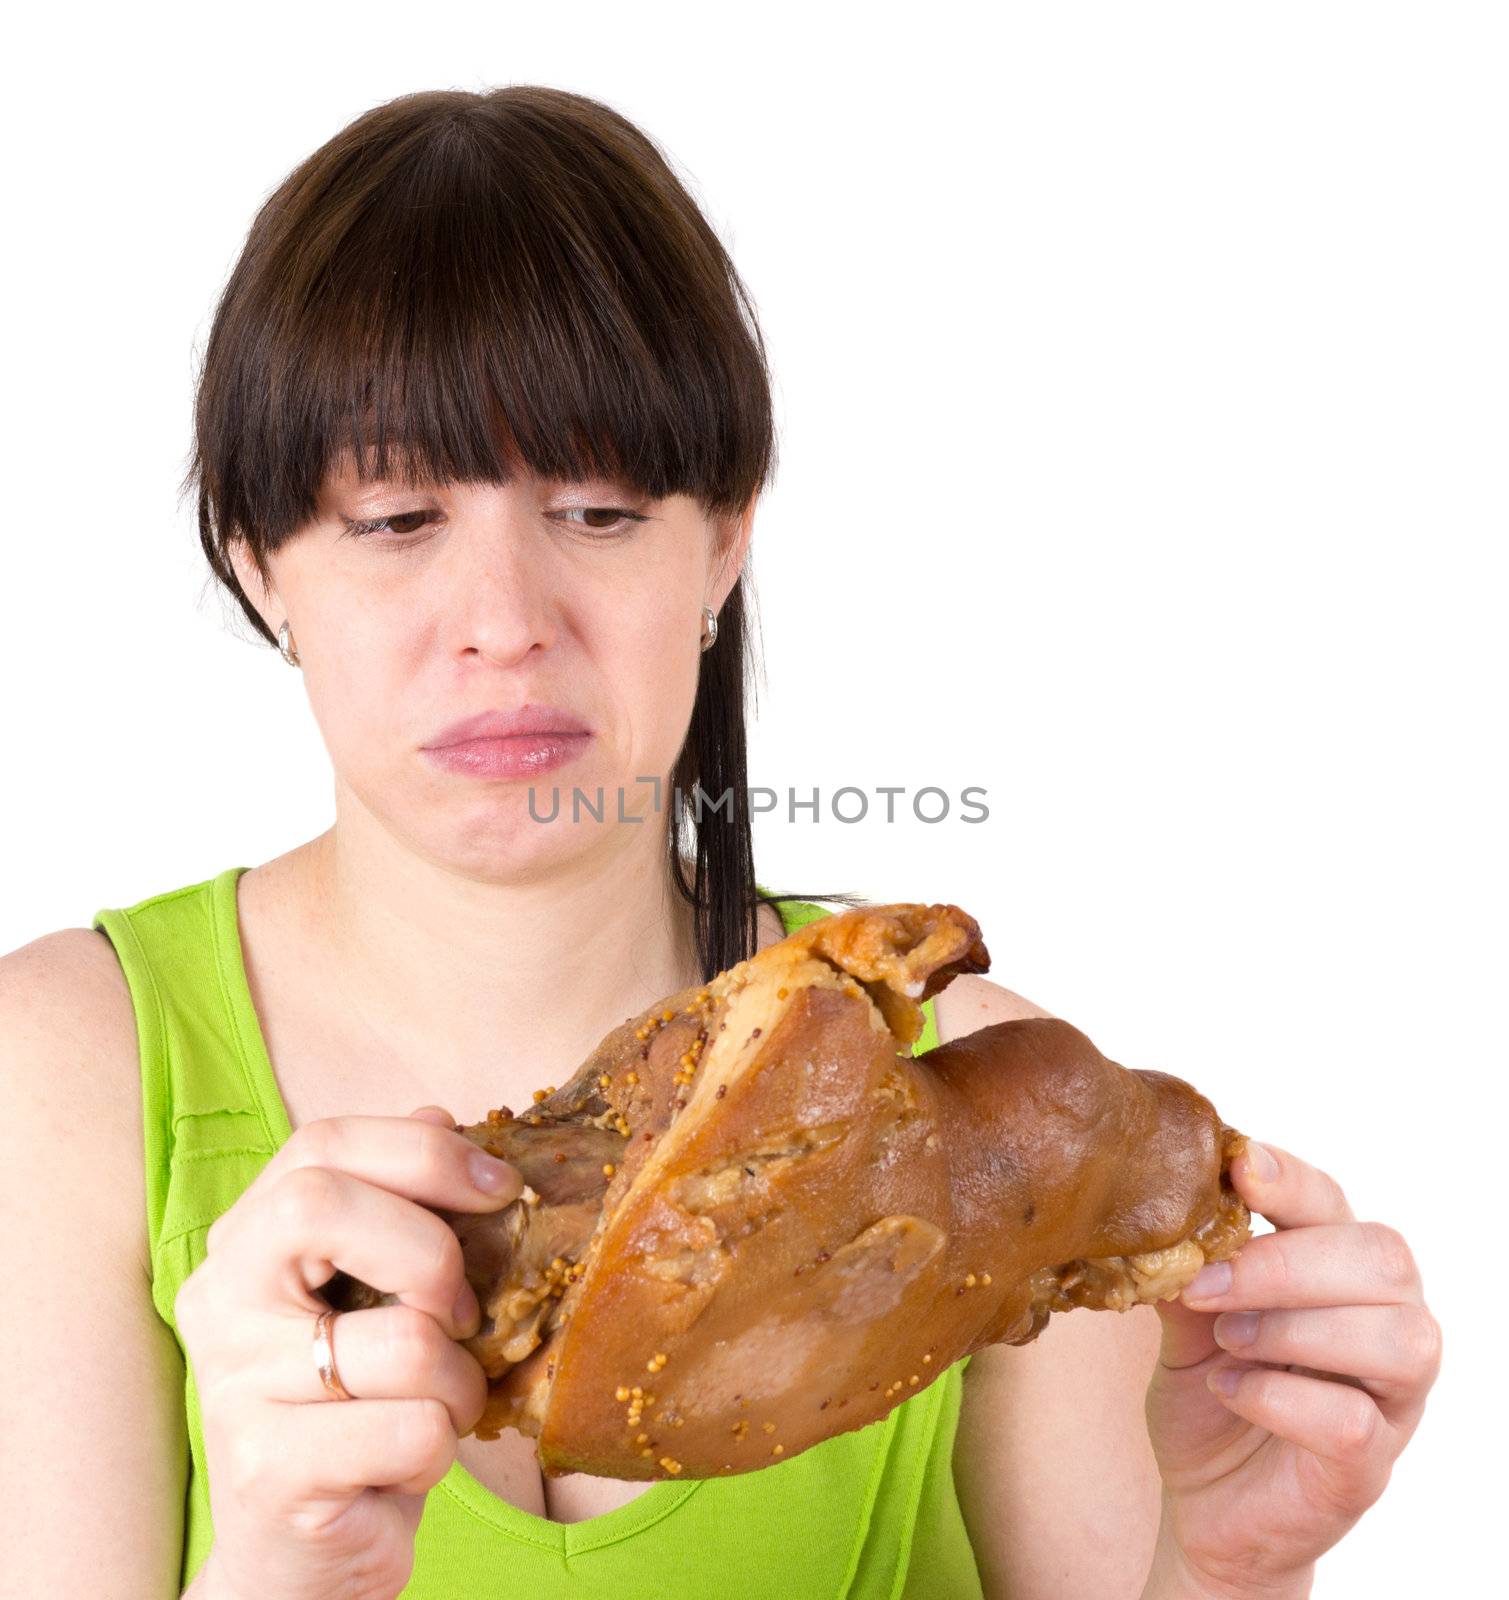 The young woman looks at a meat